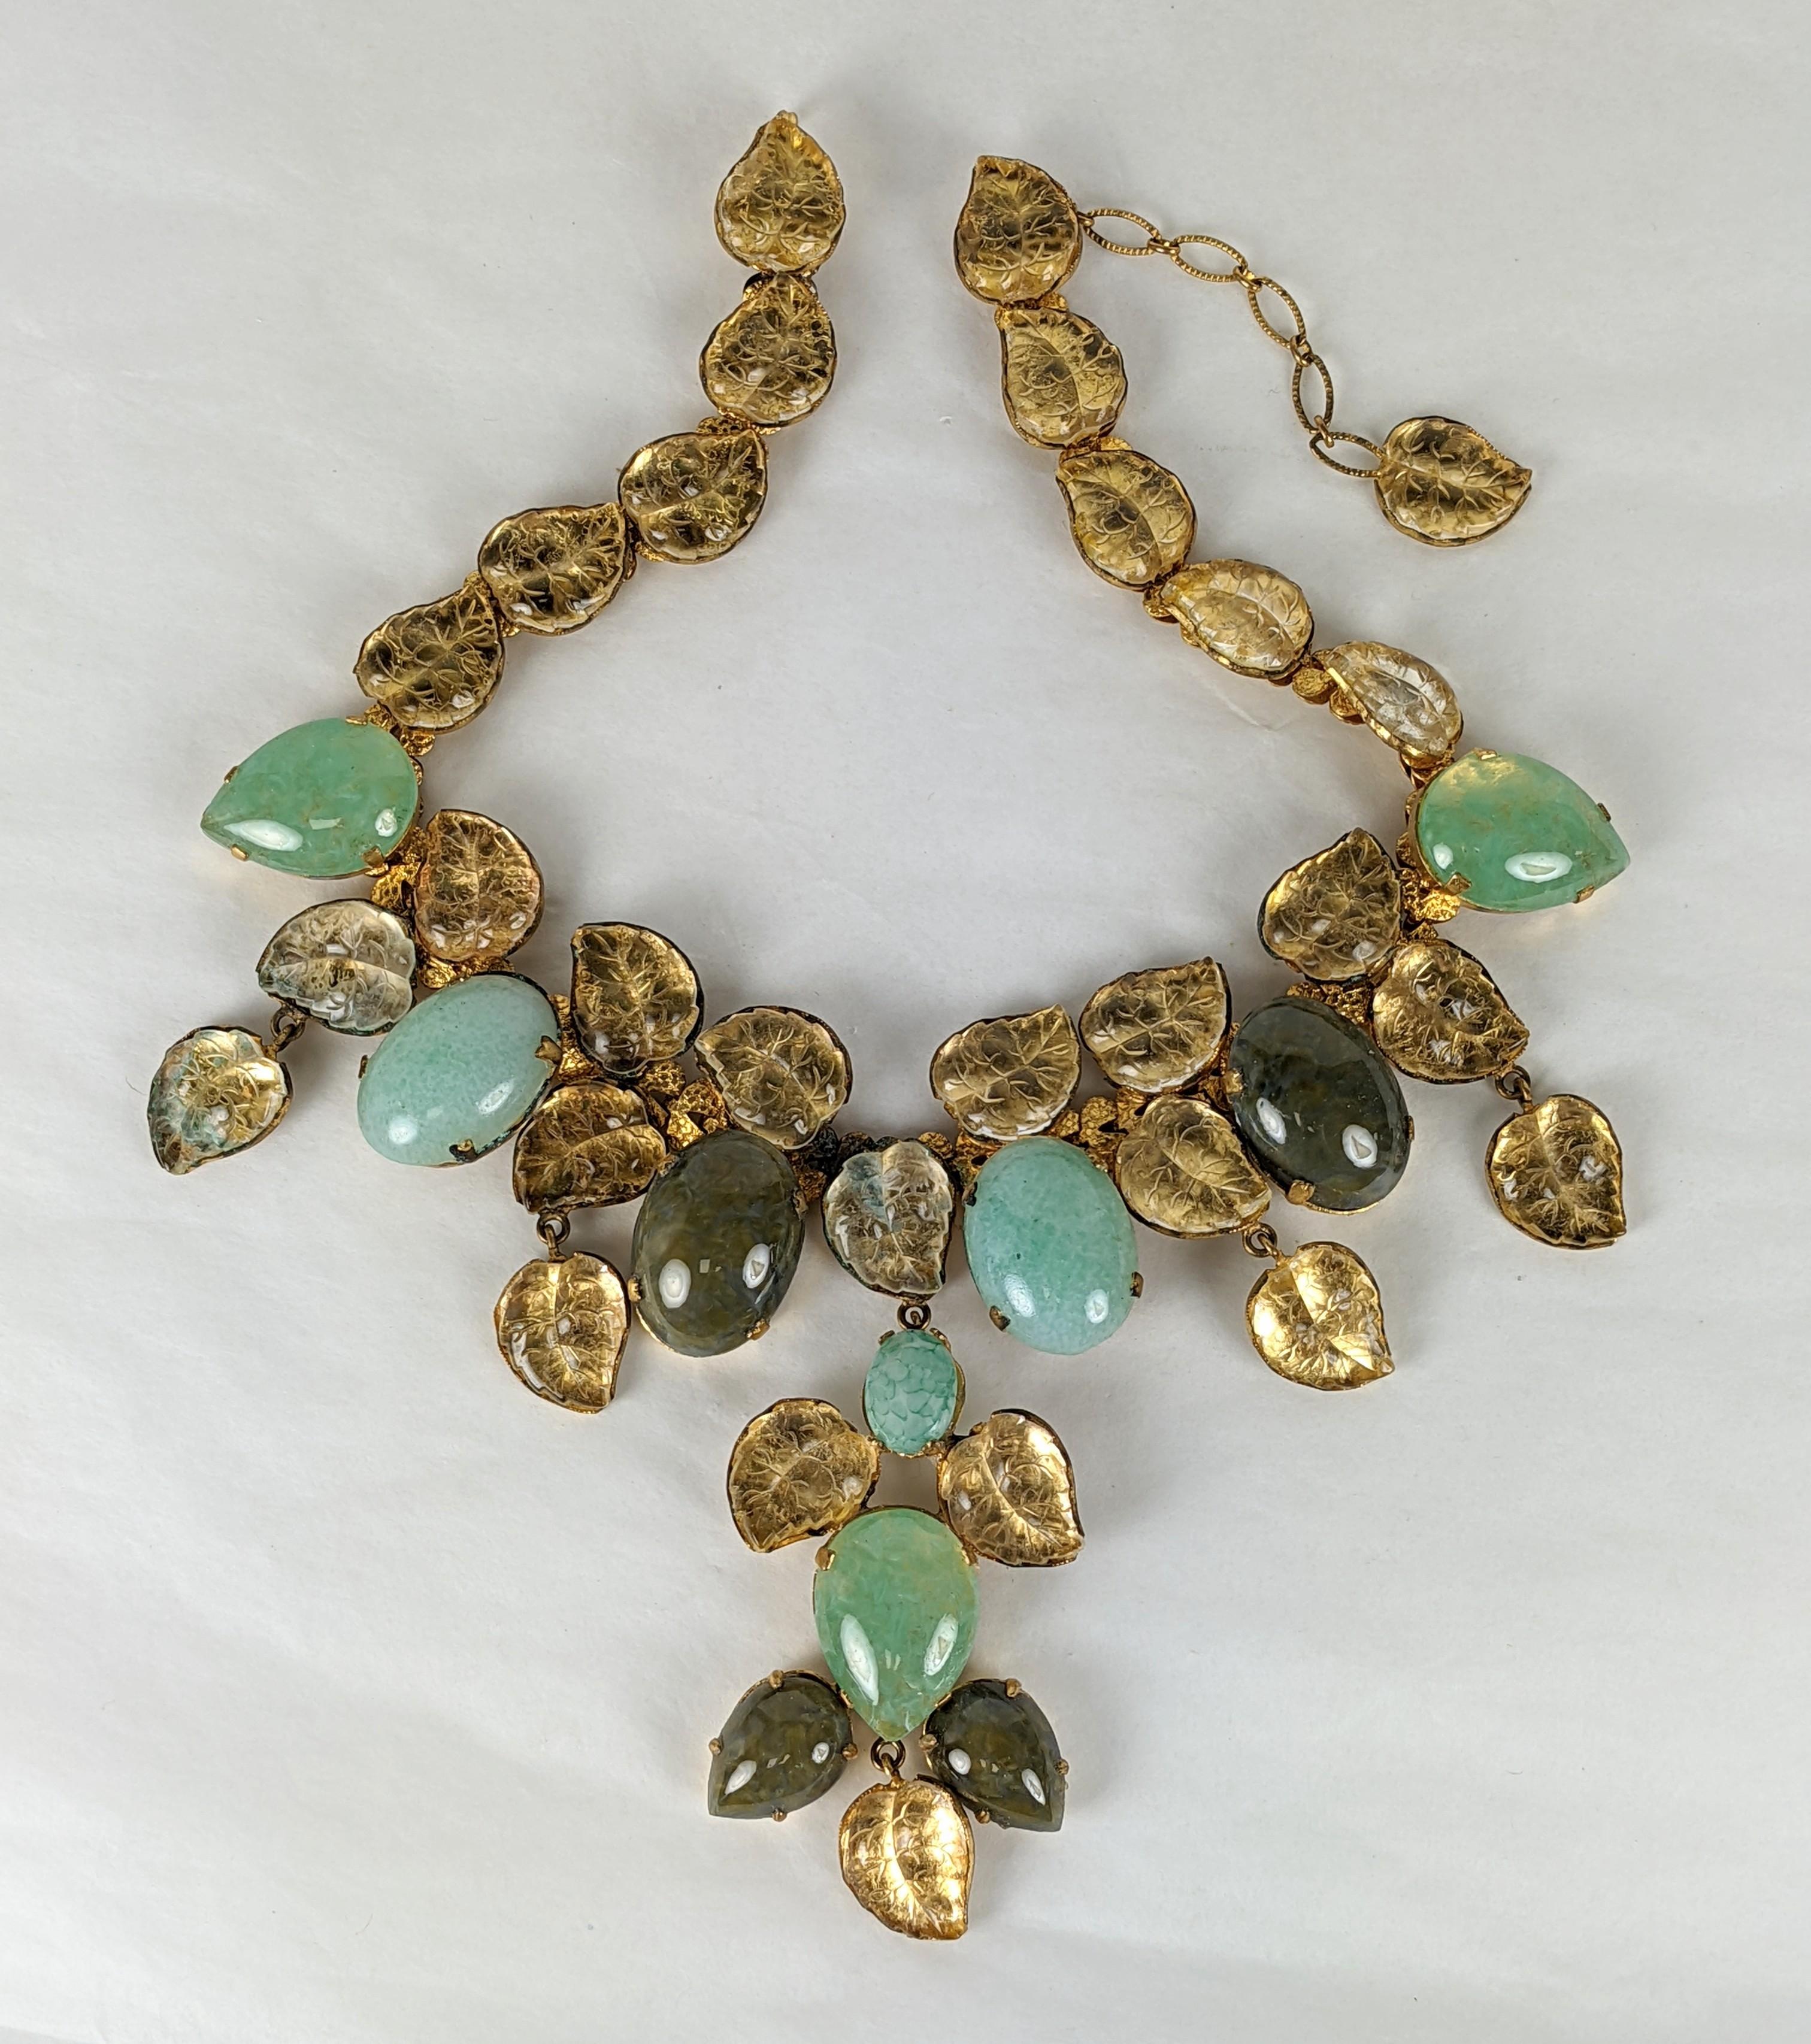 Countess Cis Massive Gripoix Glass and Fruit Salad Bib Necklace In Good Condition For Sale In New York, NY